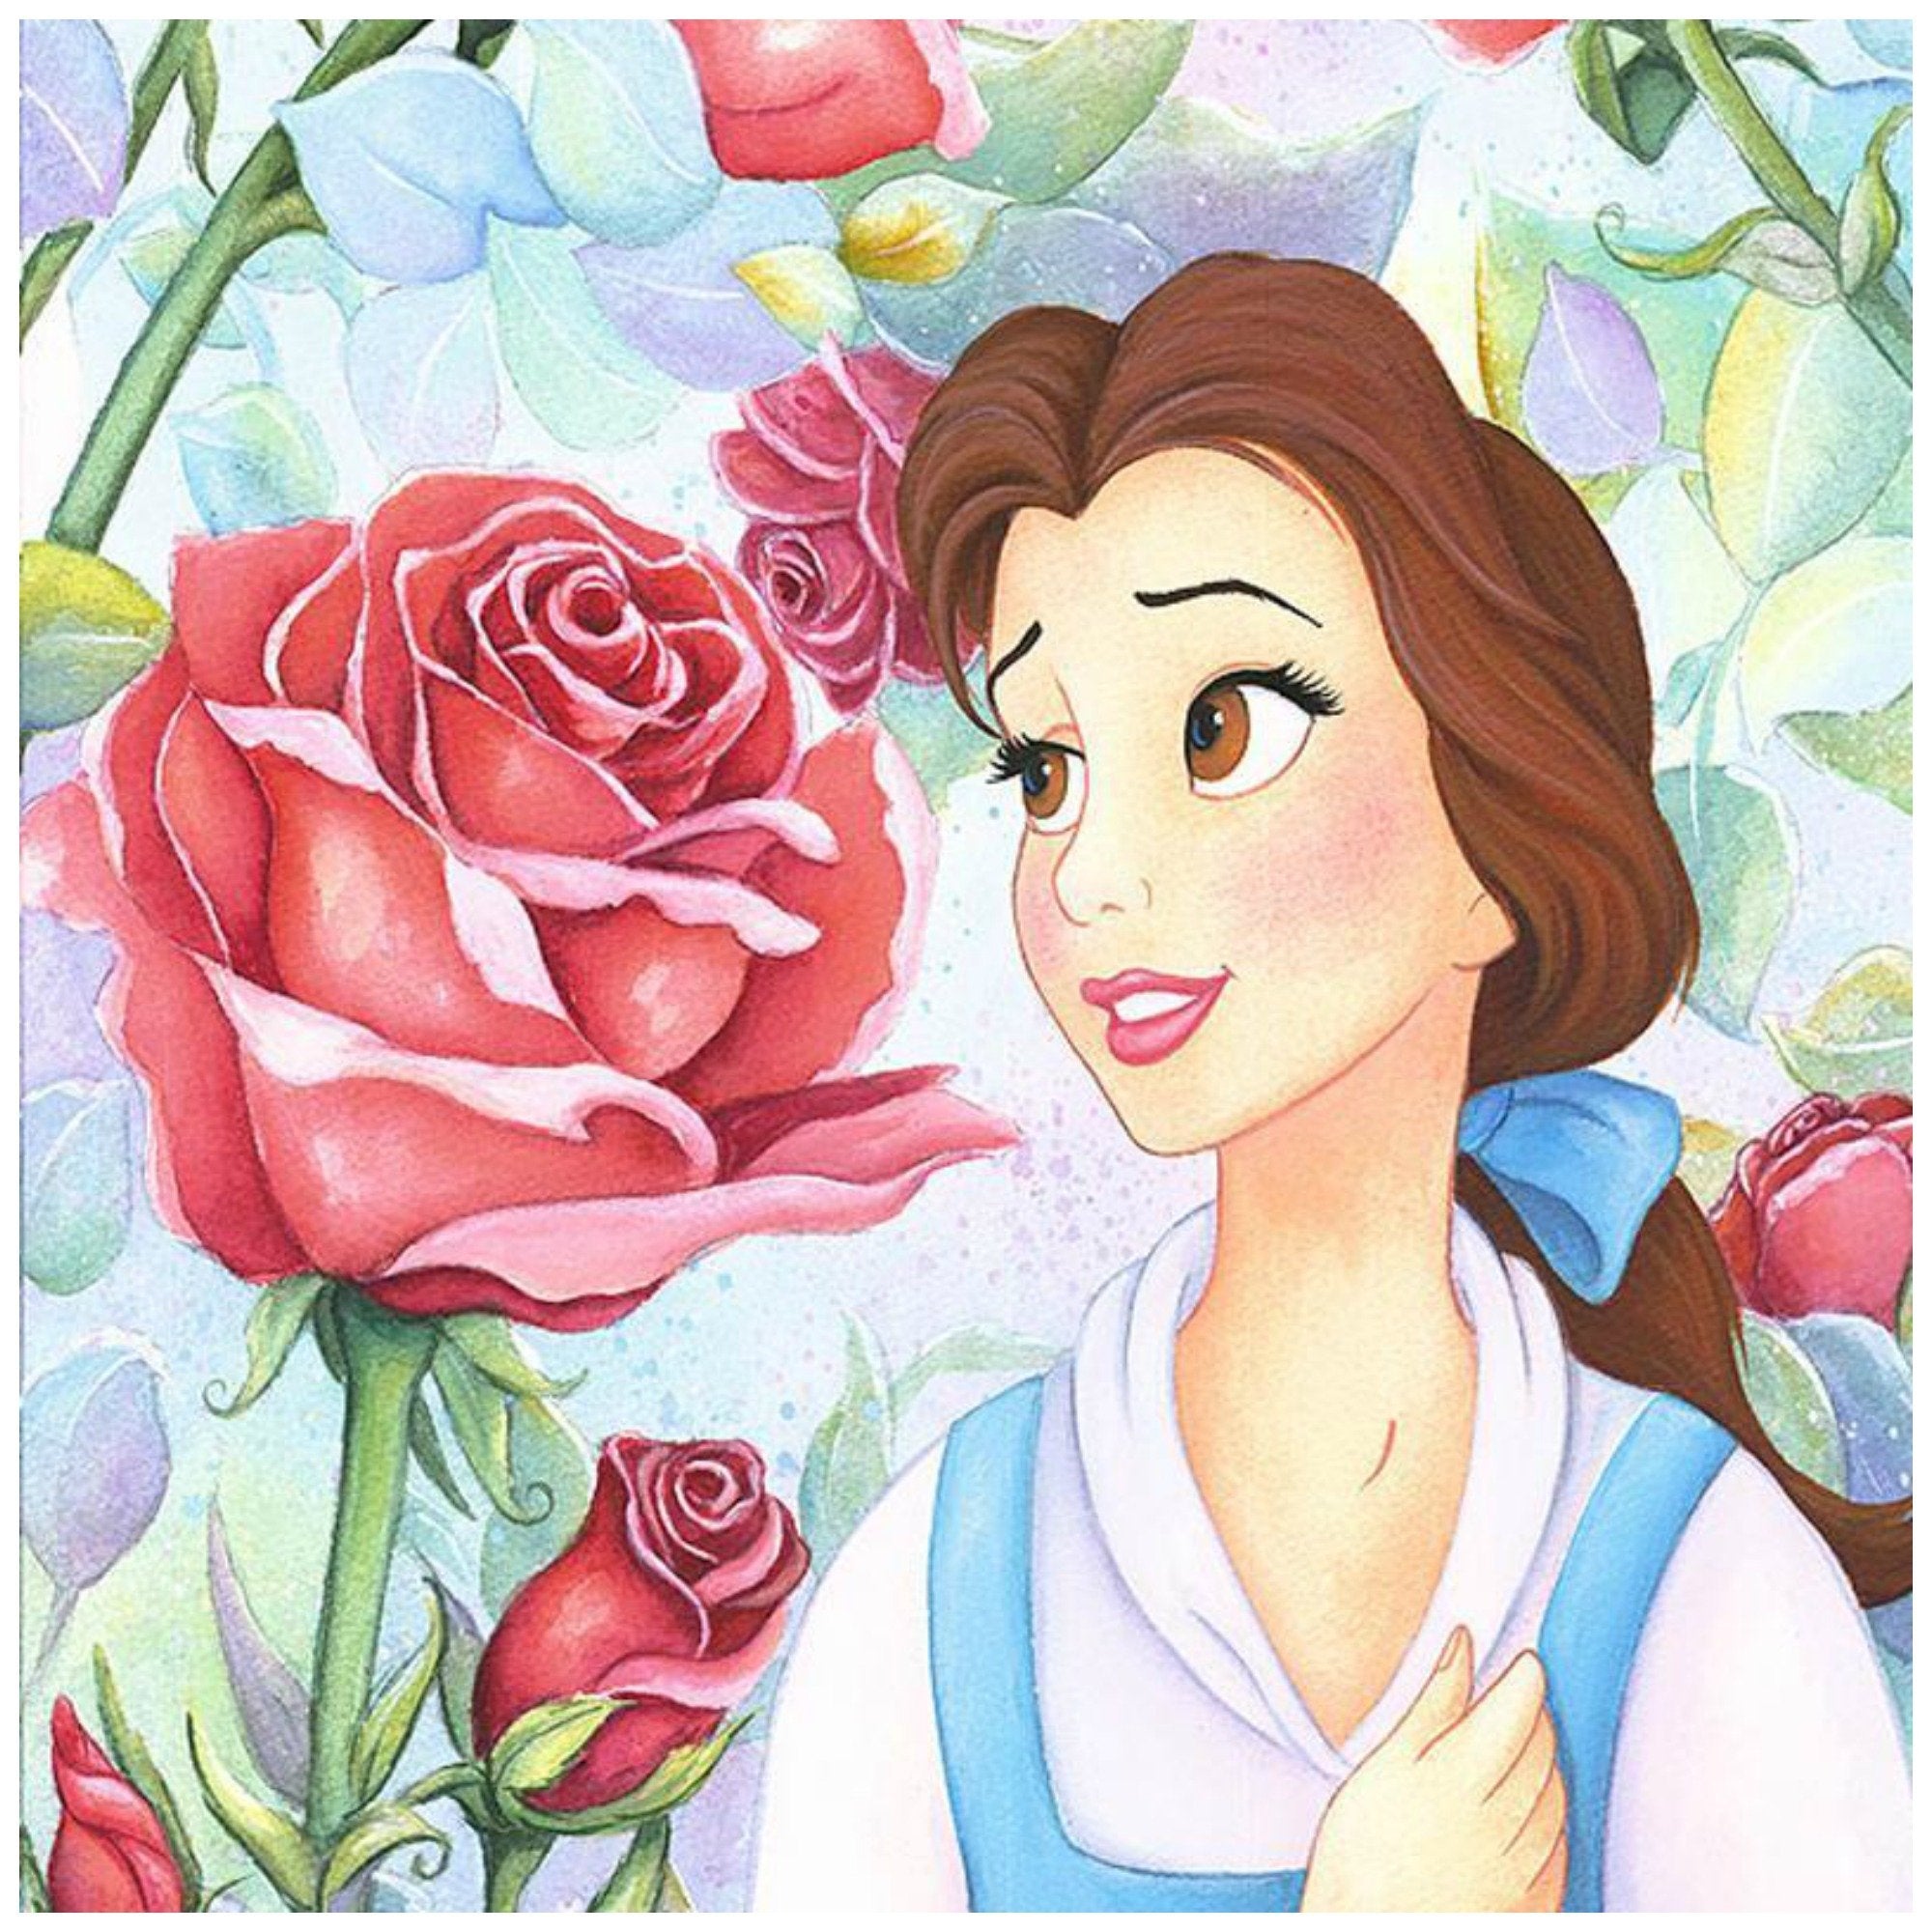 Garden of Roses by Michelle St. Laurent.  The Belle is surrounded by beautiful red roses in the garden - closeup.